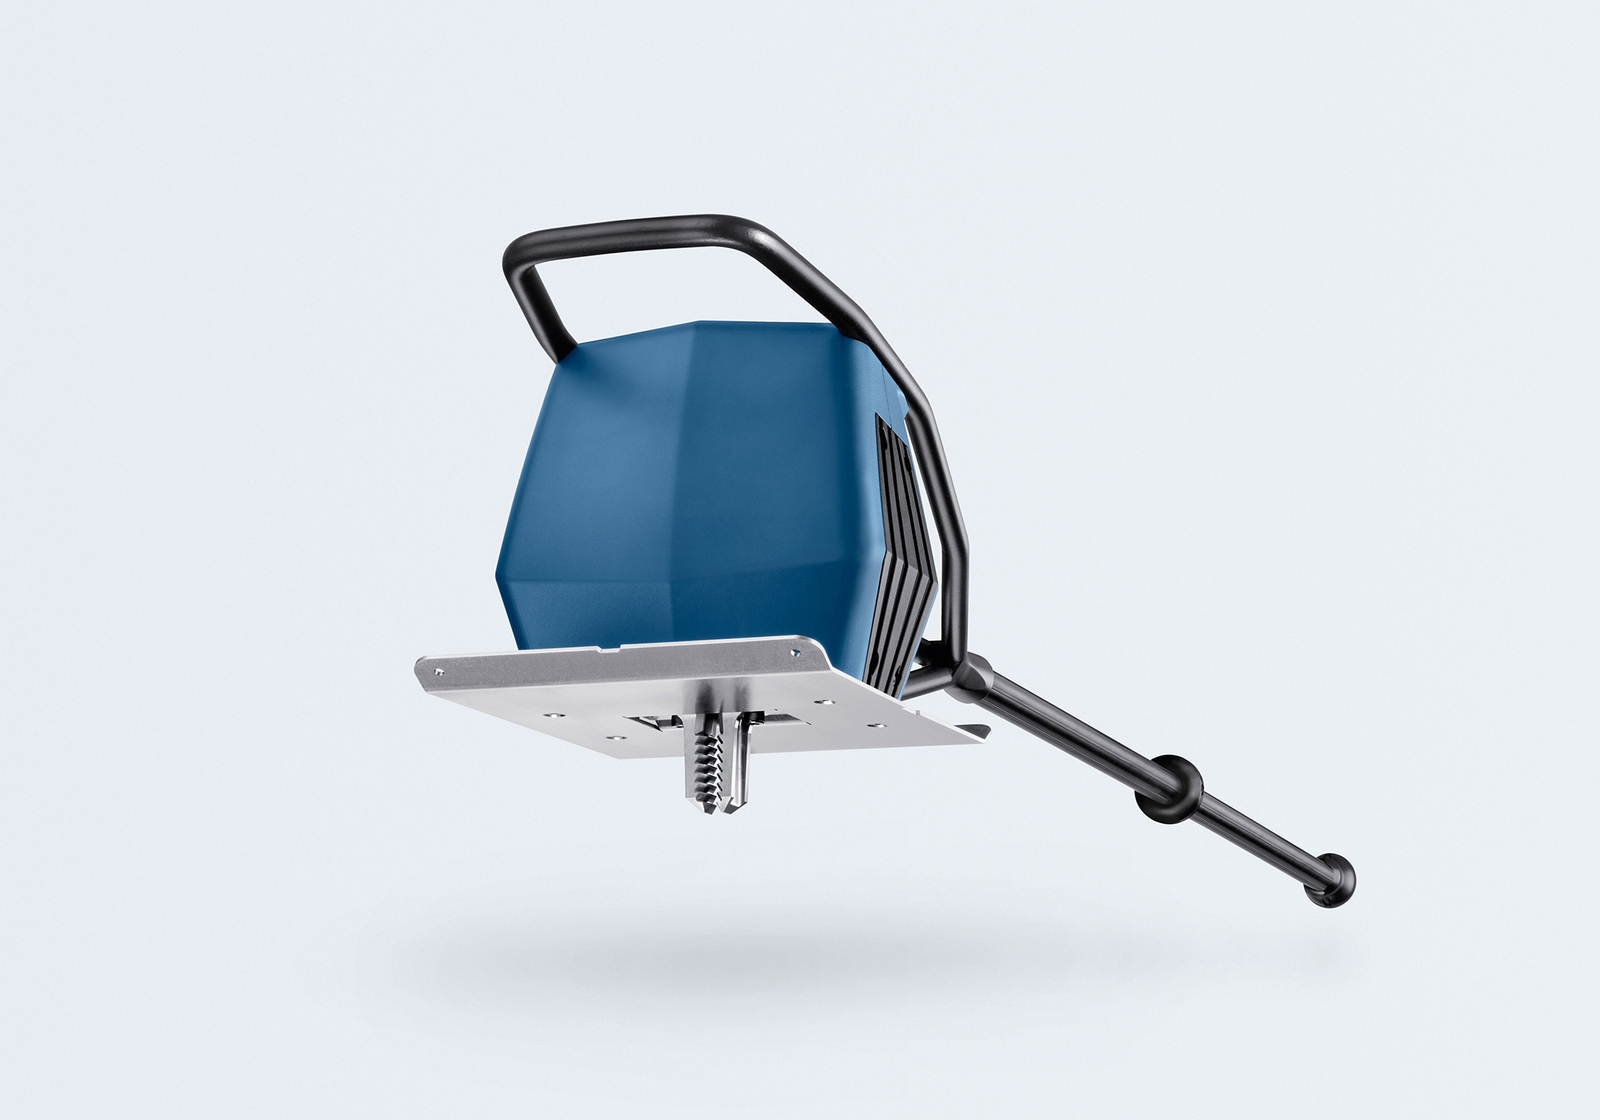 TRUMPF Power Tool | The Specialist for Clean Slat Support | In-Stock Now